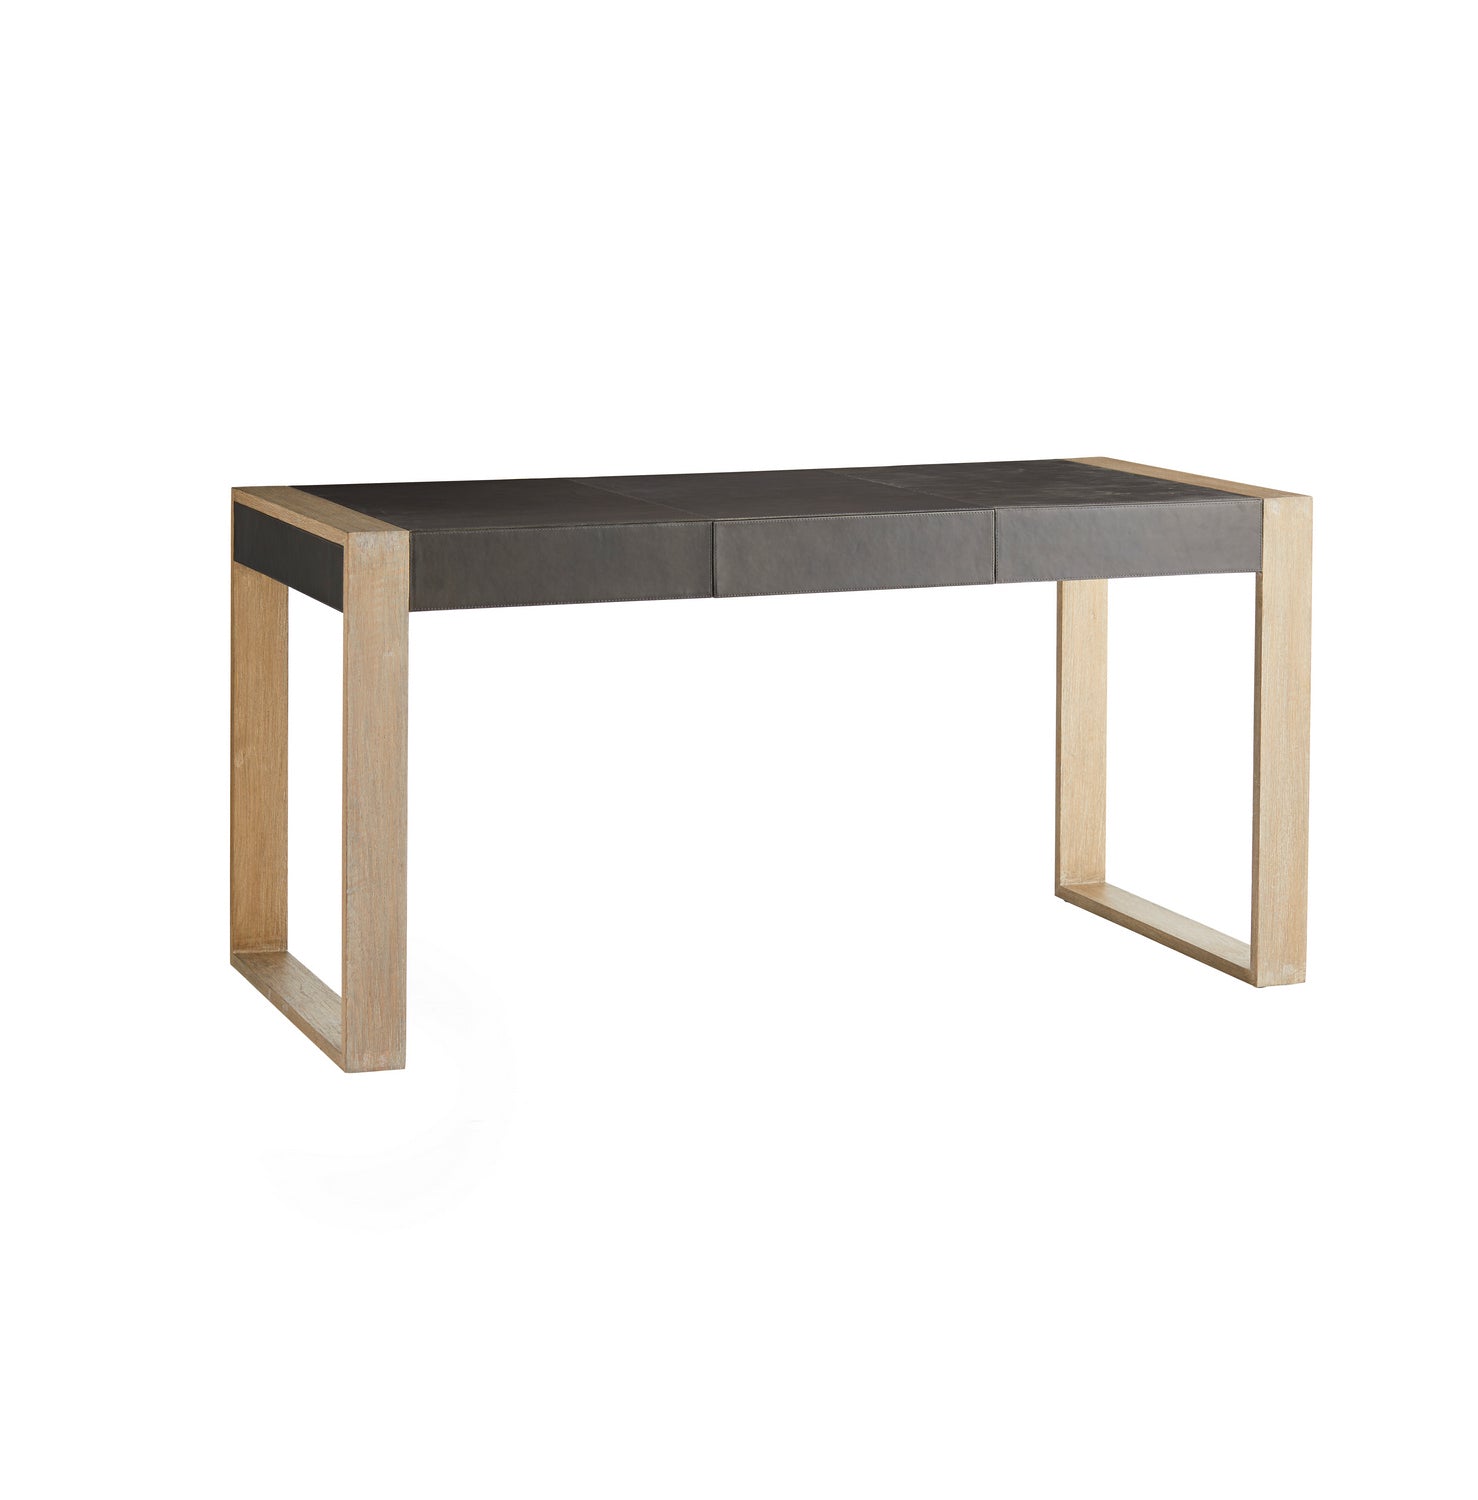 Desk from the Honour collection in Smoke finish